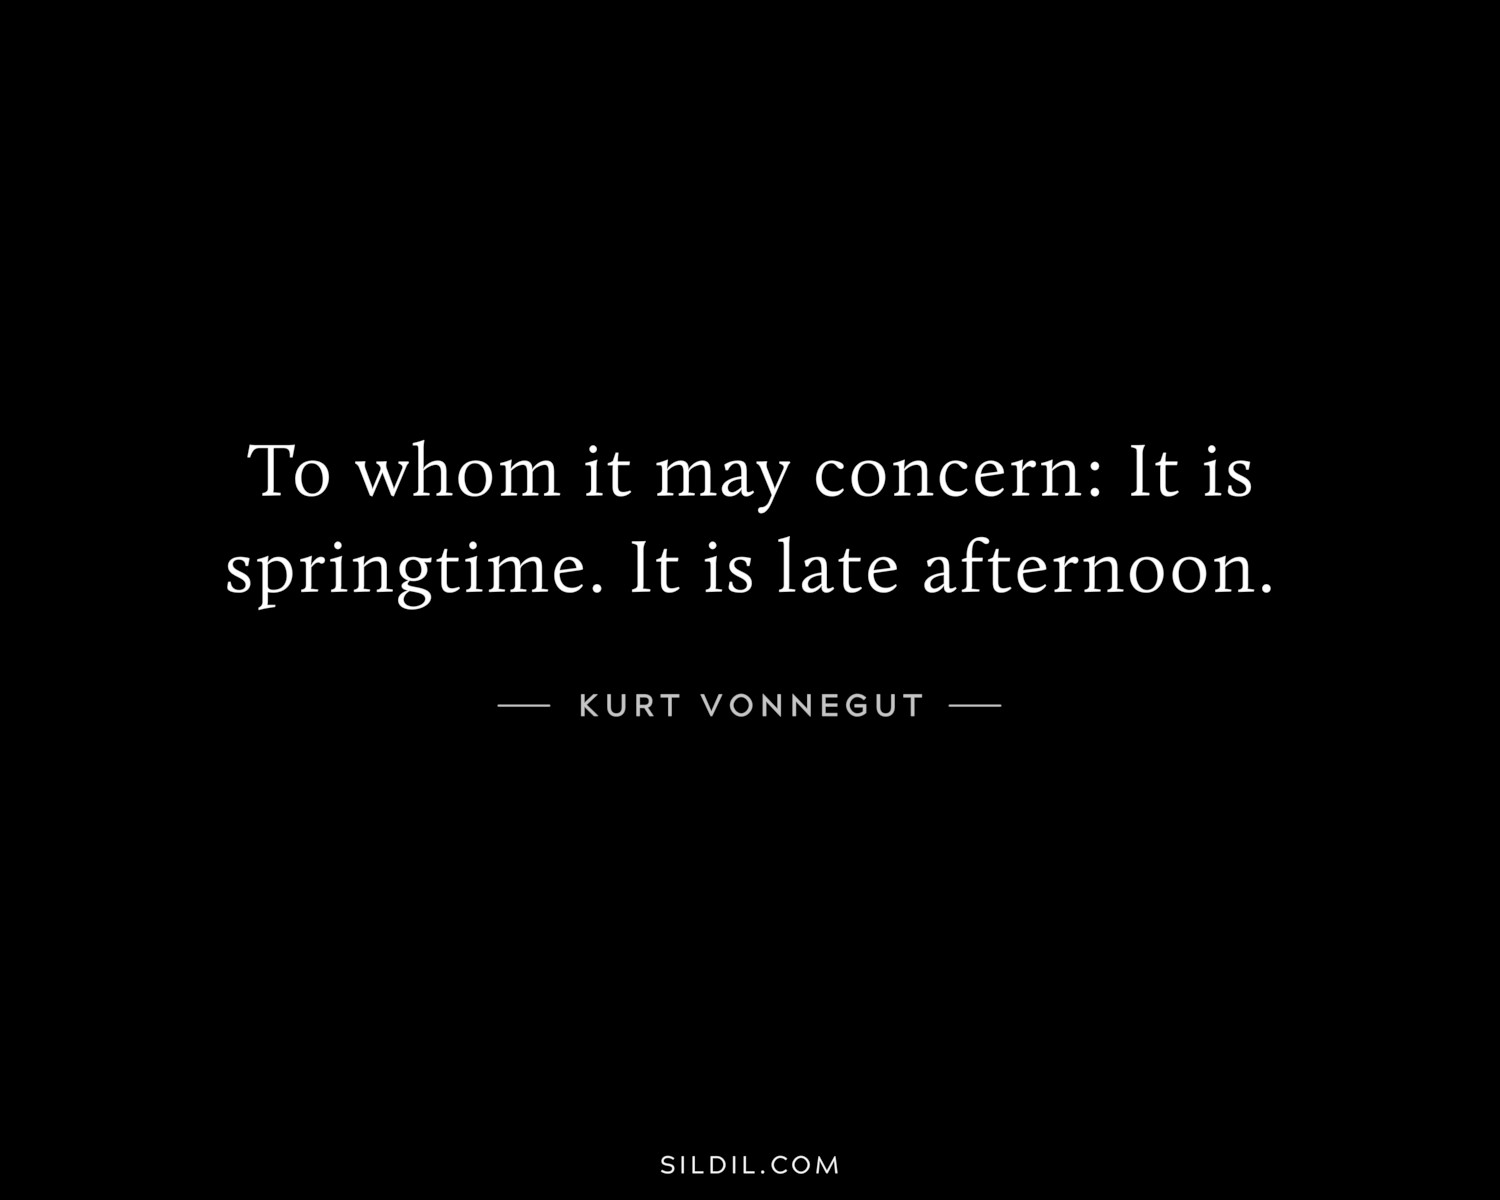 To whom it may concern: It is springtime. It is late afternoon.